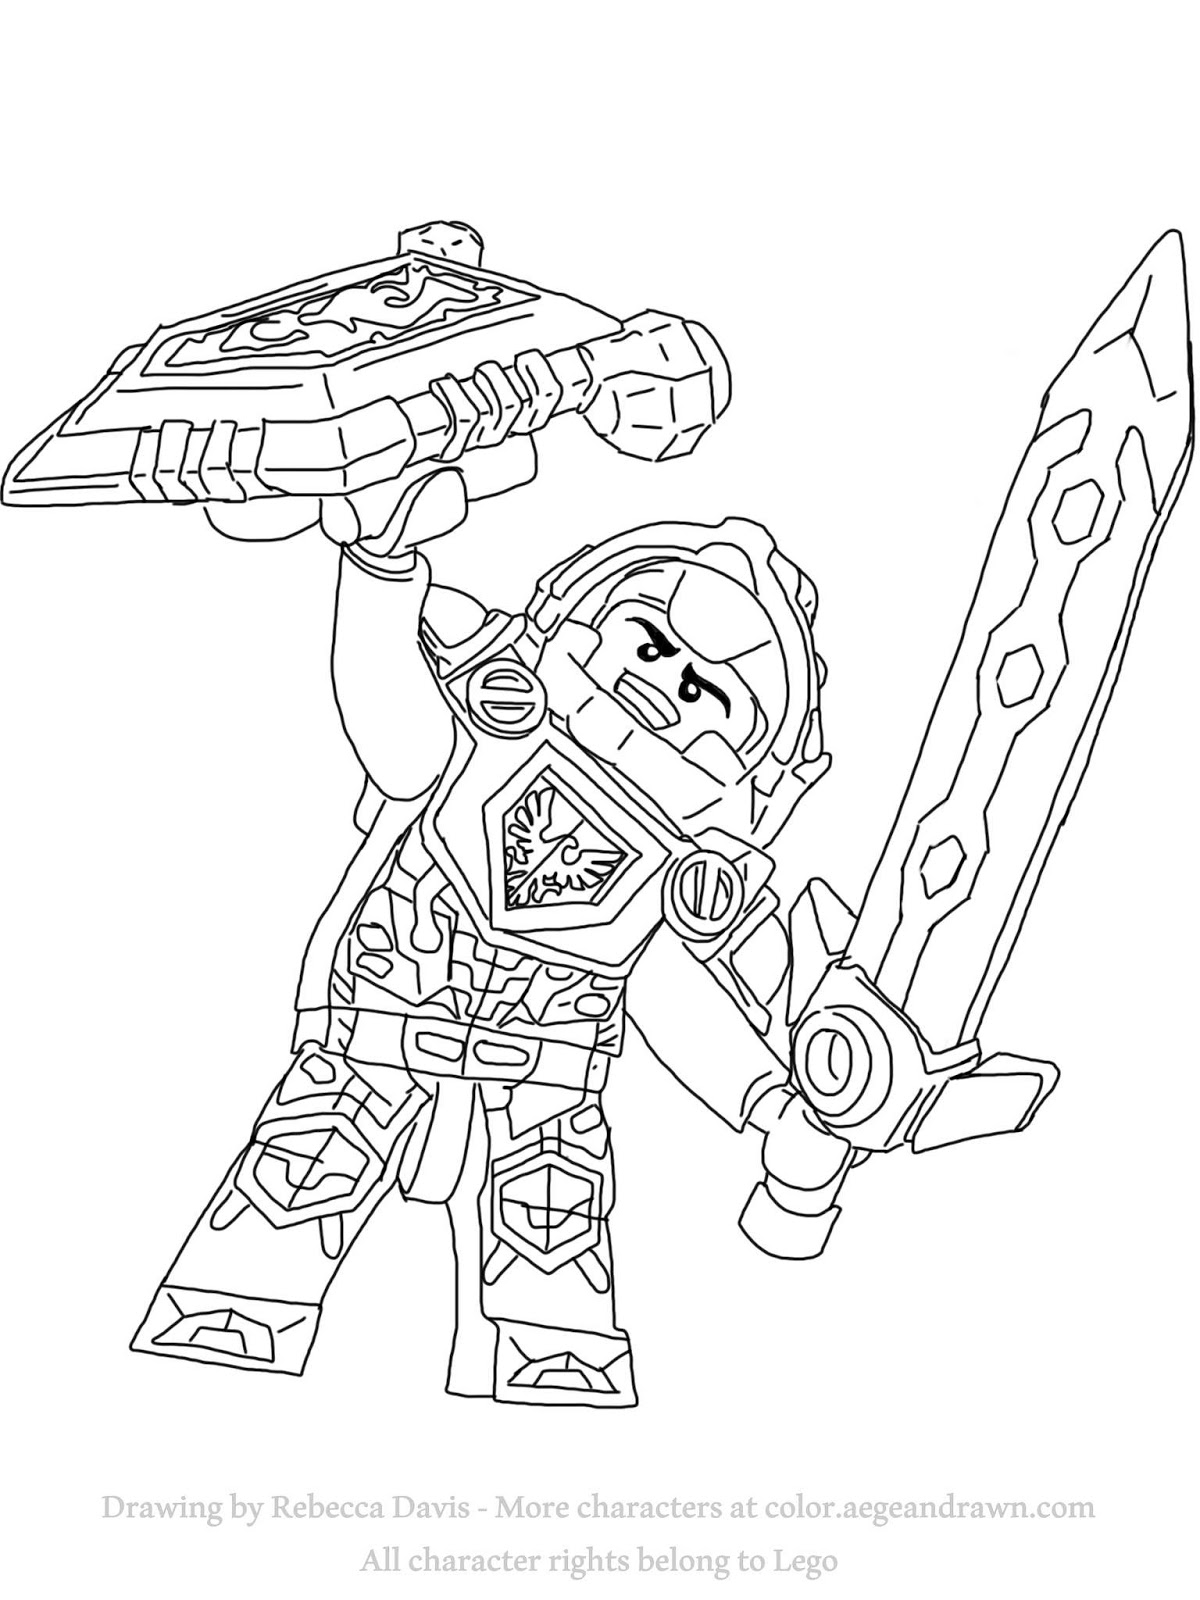 Aegean Drawn: Nexo Knights Coloring Pages